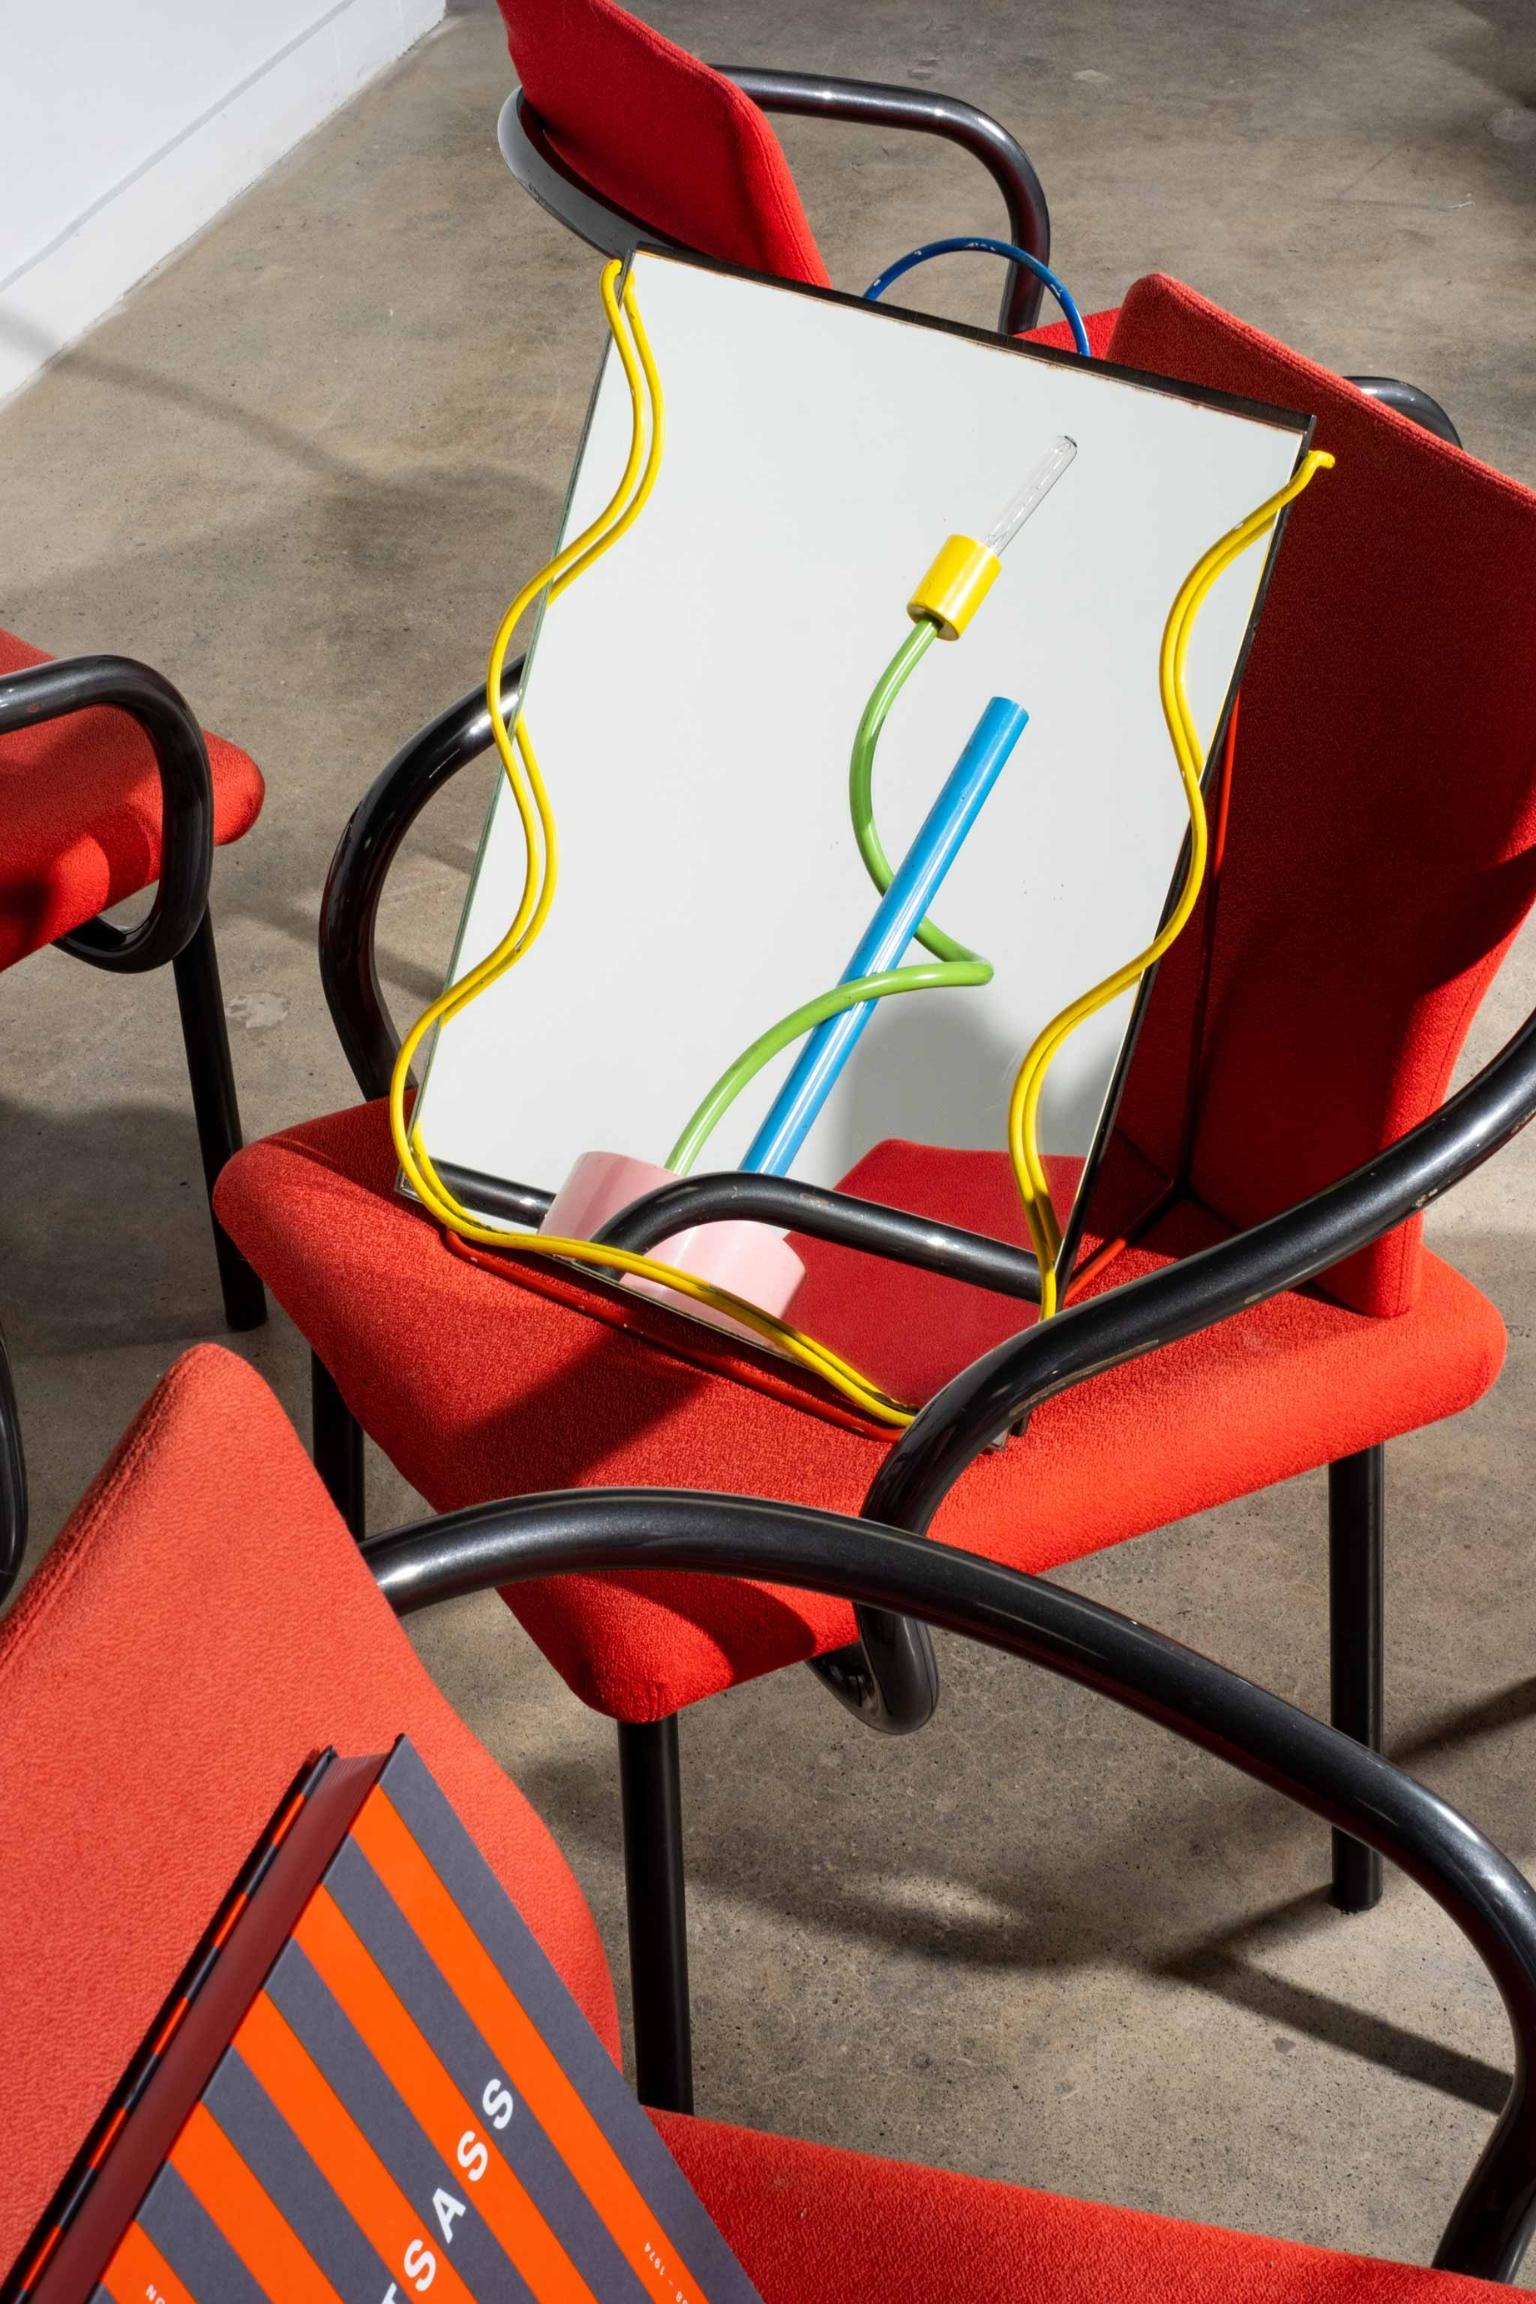 Conceived by Italian architect and designer, Ettore Sottsass and manufactured in 1986 by Knoll, the Mandarin chair is a highly functional design with distinctive one-piece arm-rail that wraps under and around the seats and back. Its sculptural arms